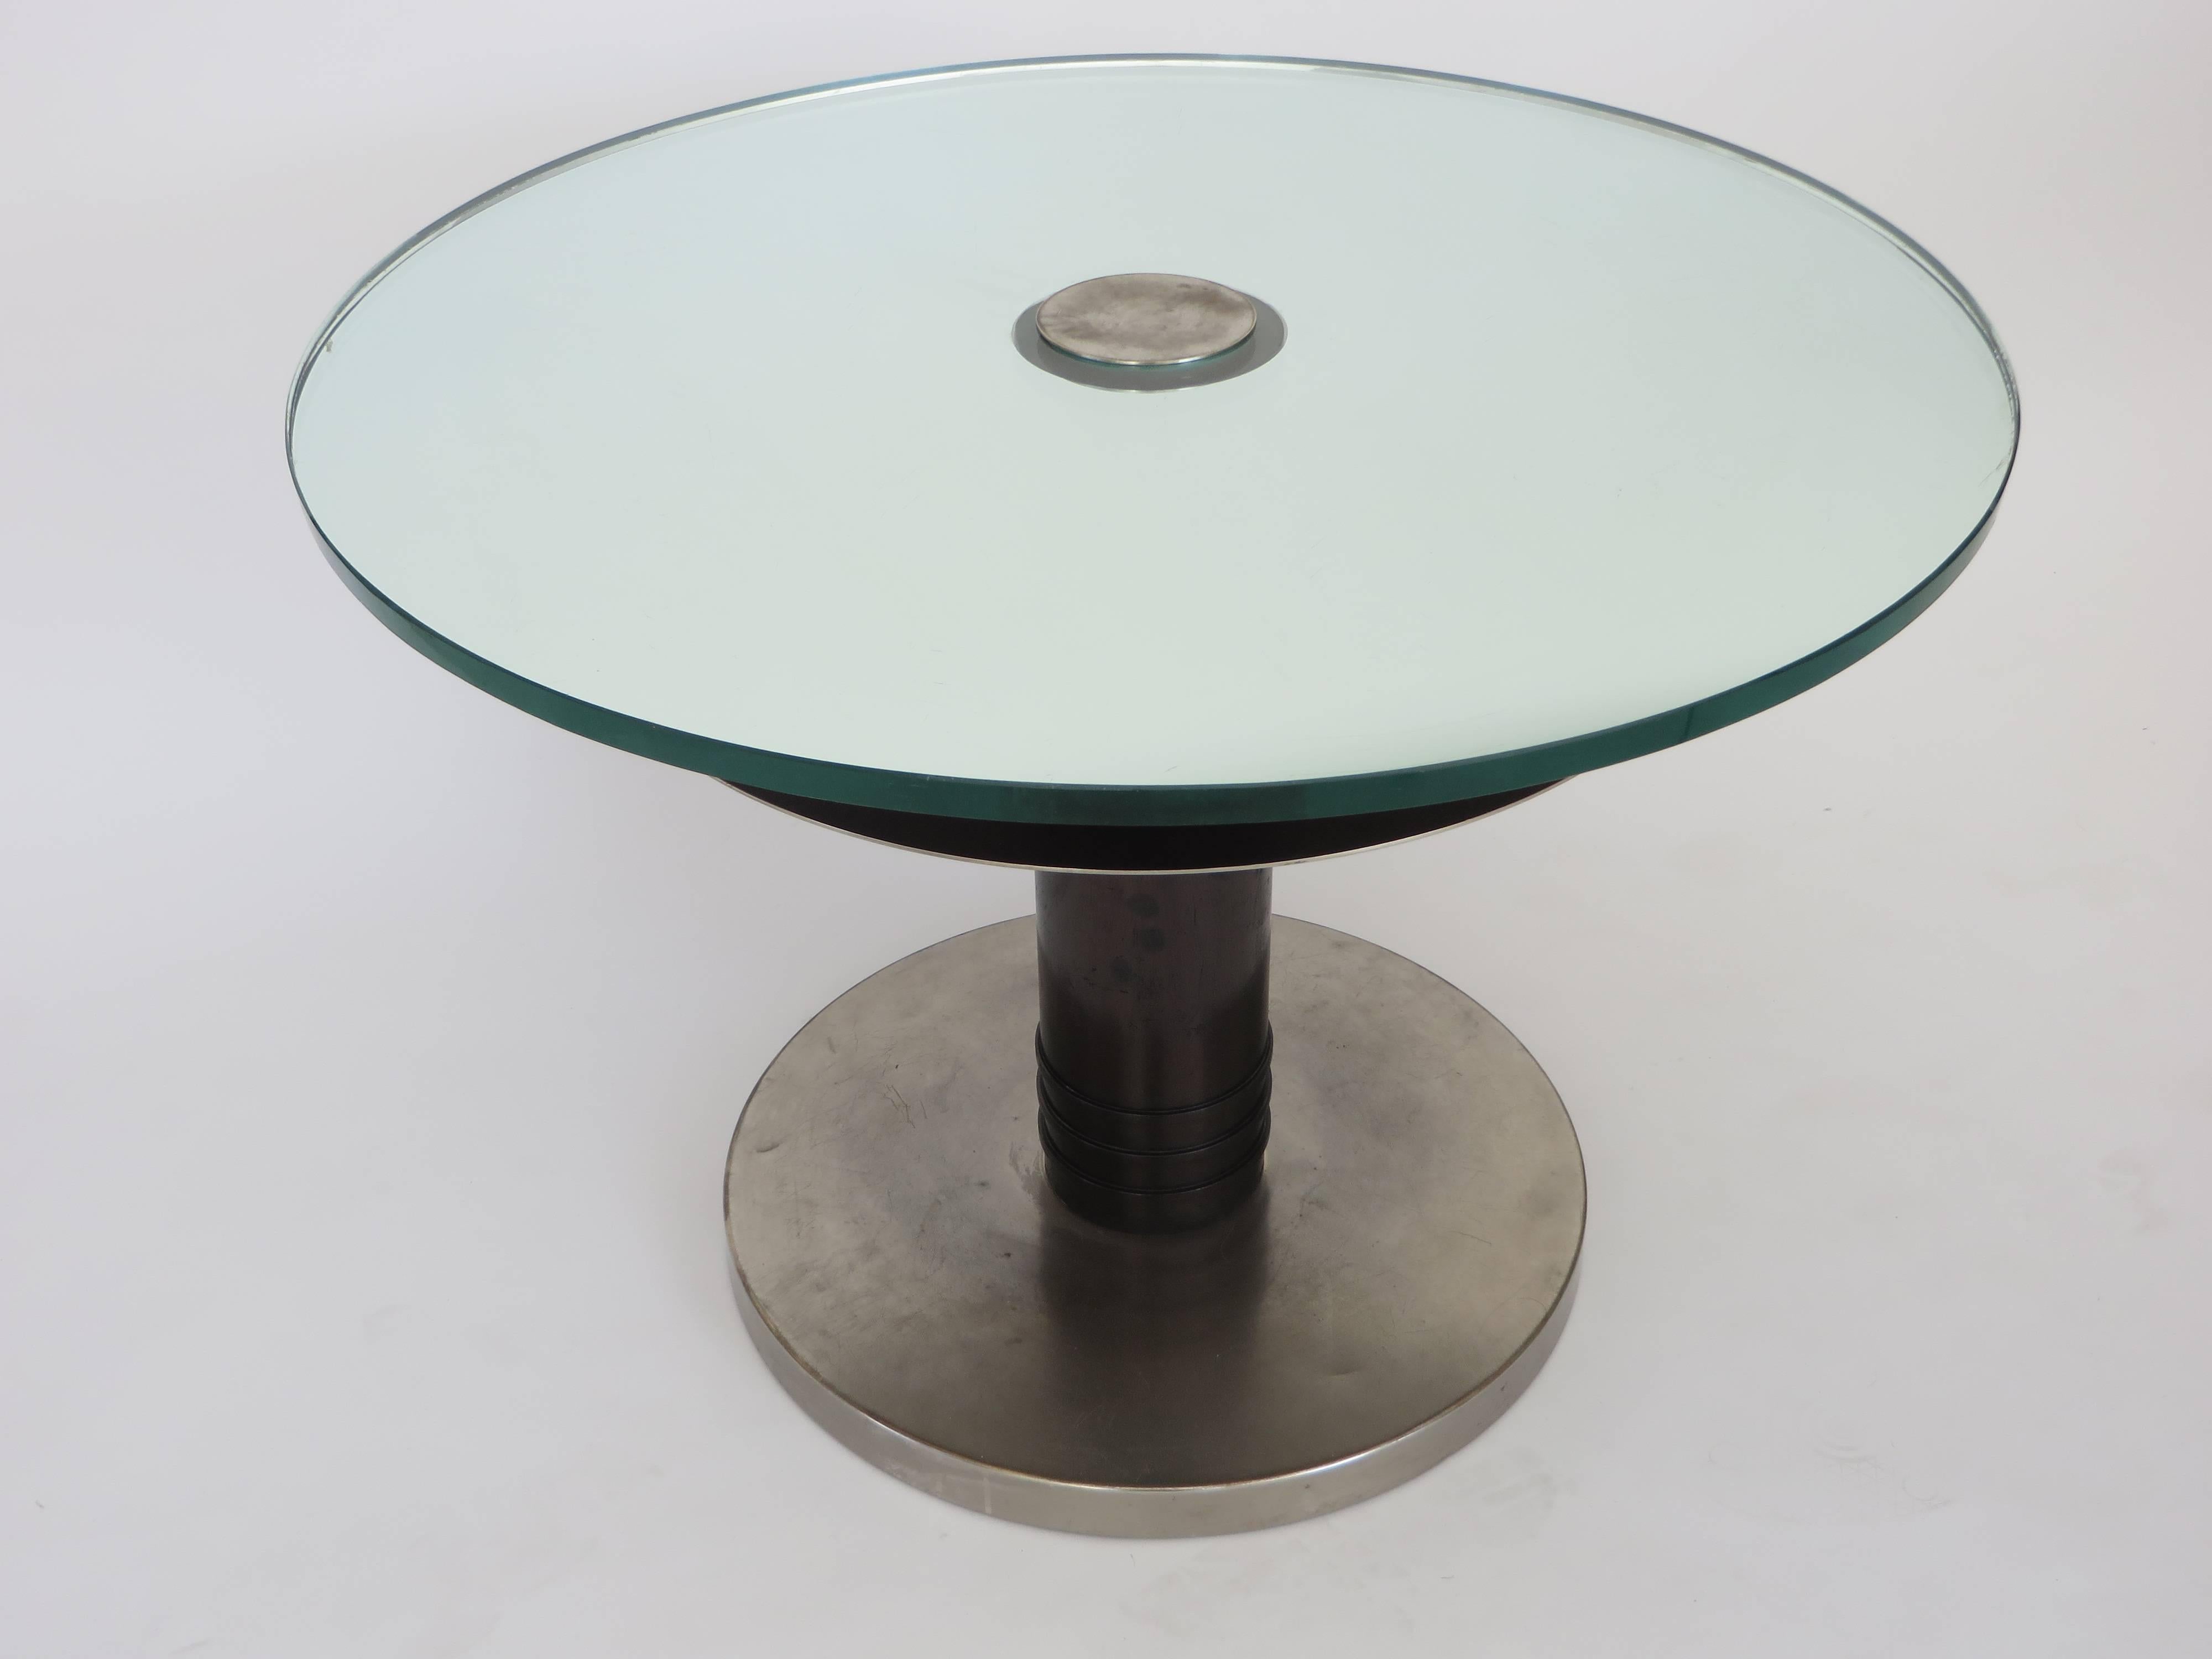 Axel Einar Hjorth rare occasional table Typenko from 1931.
Pictured in Axel Einar Hjorth: Mobilarkhiteckt, Bjork, Ekstrom, Ericson,
p123 a similar form.
This table has patina from its age and use. The mirrored glass is in excellent condition. No